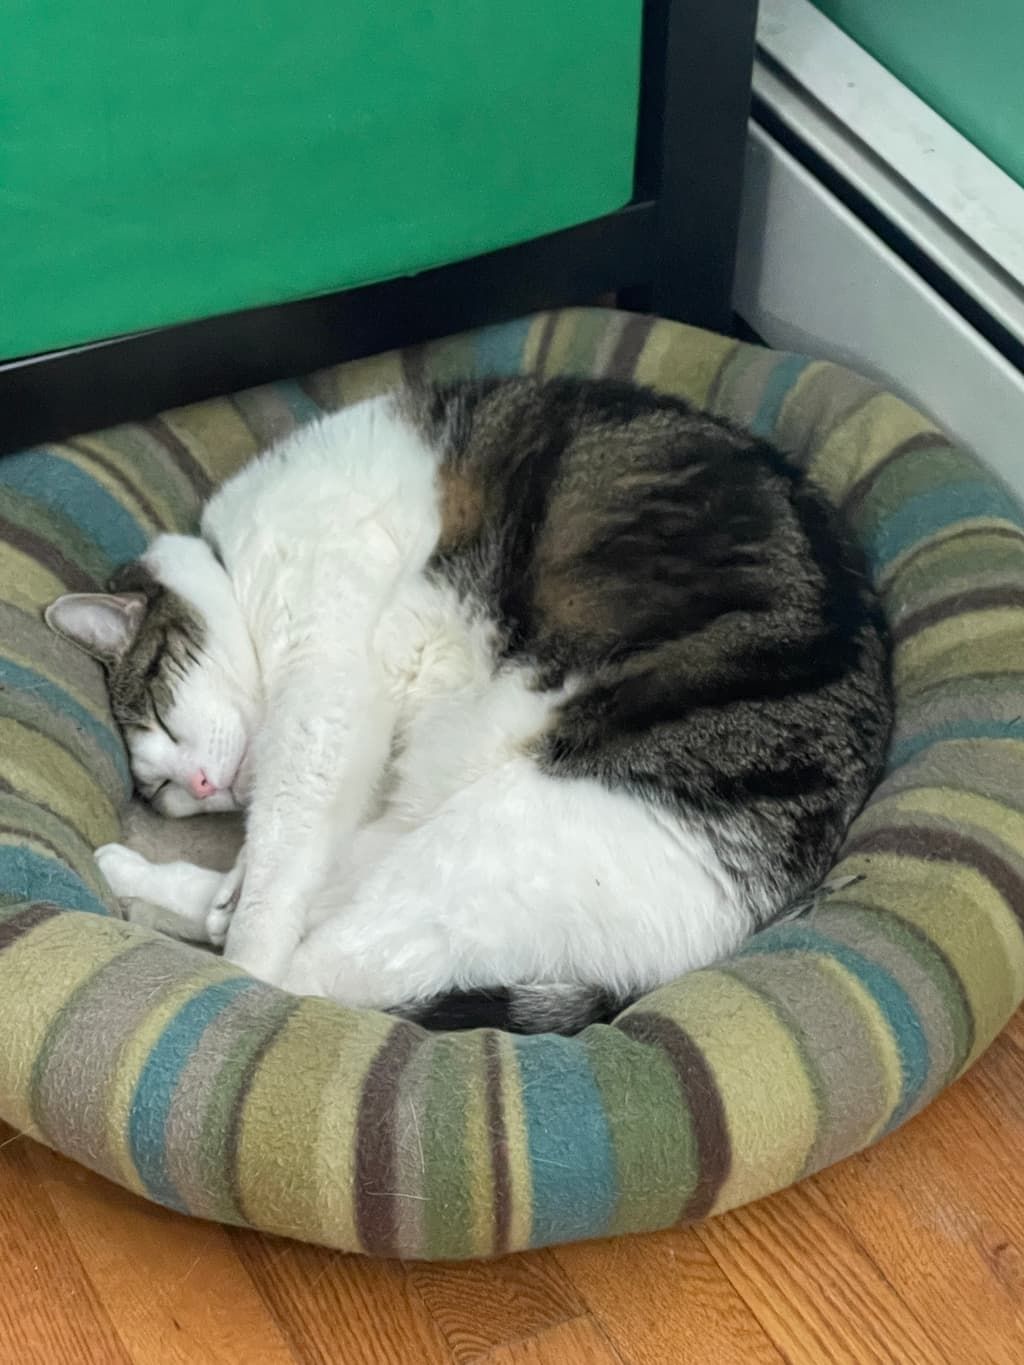 Cookie curled up in a ball in her bed